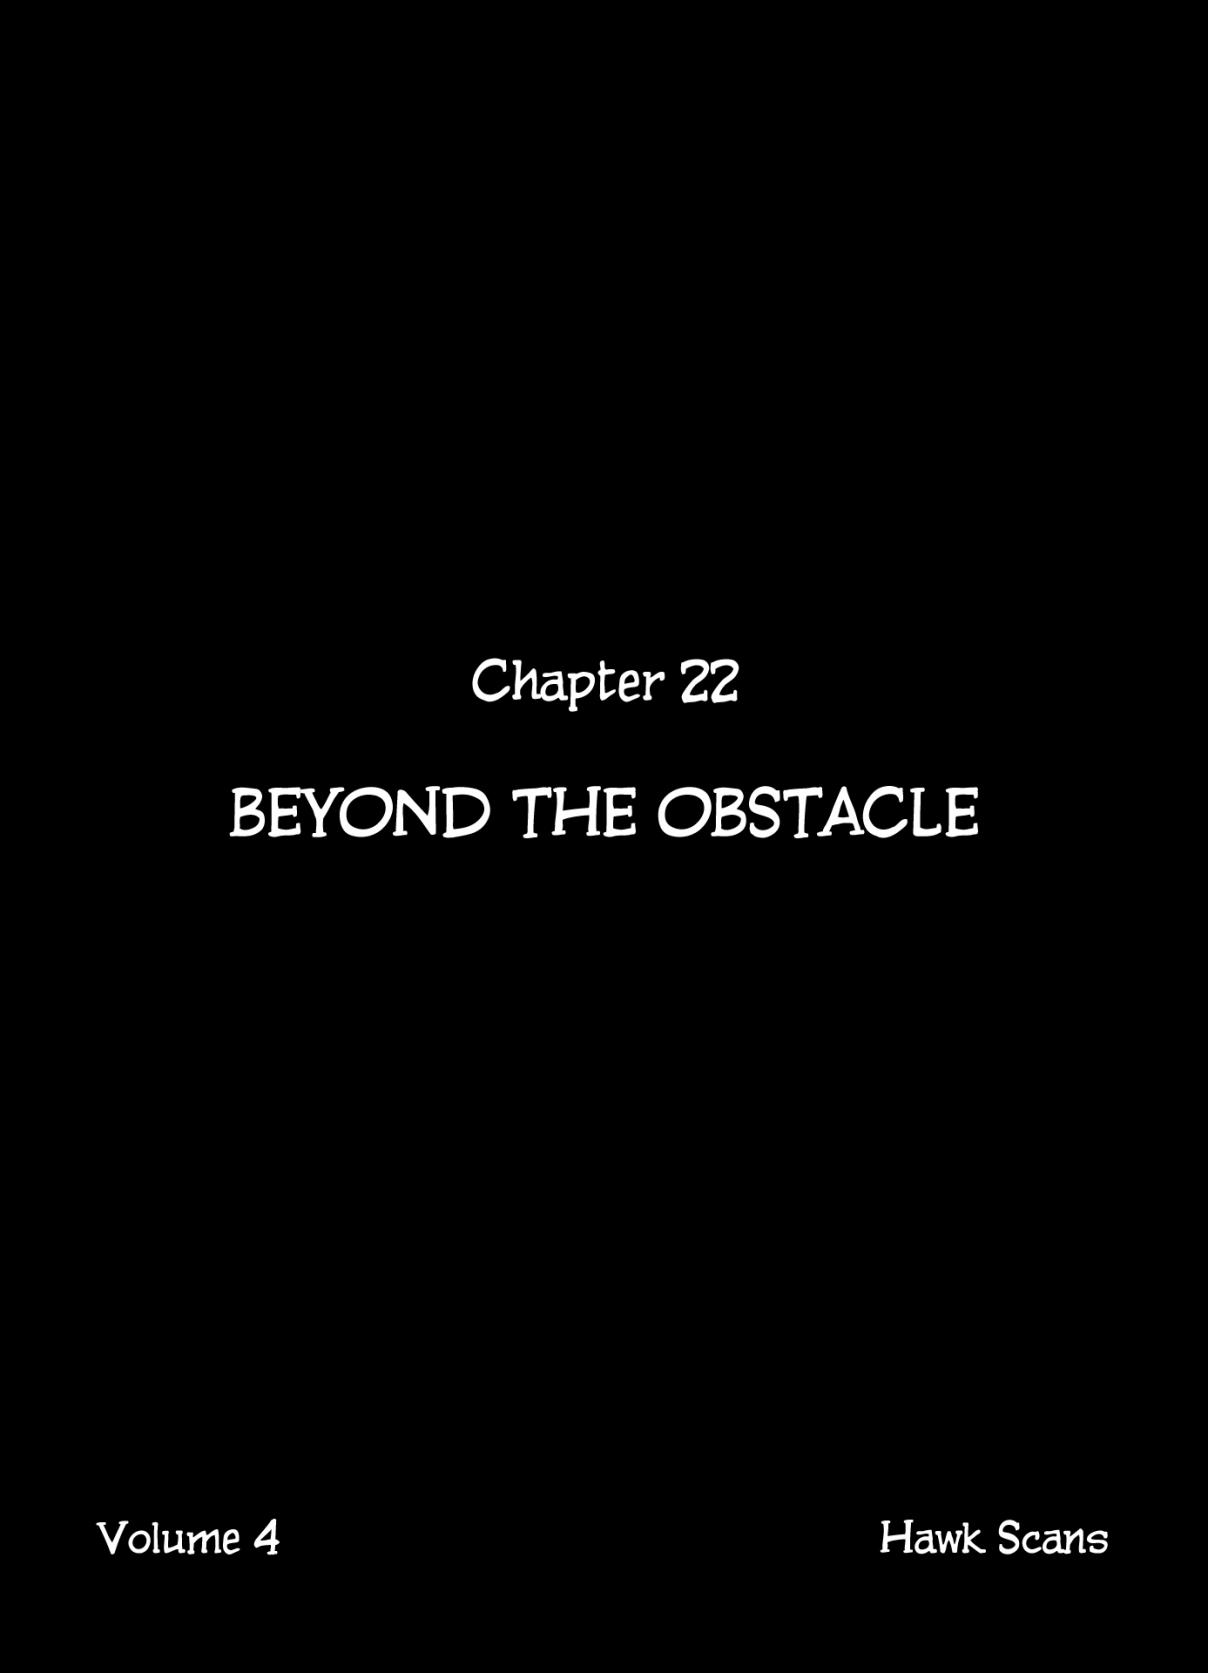 Chitei Ryokou Vol. 4 Ch. 22 Beyond the Obstacle